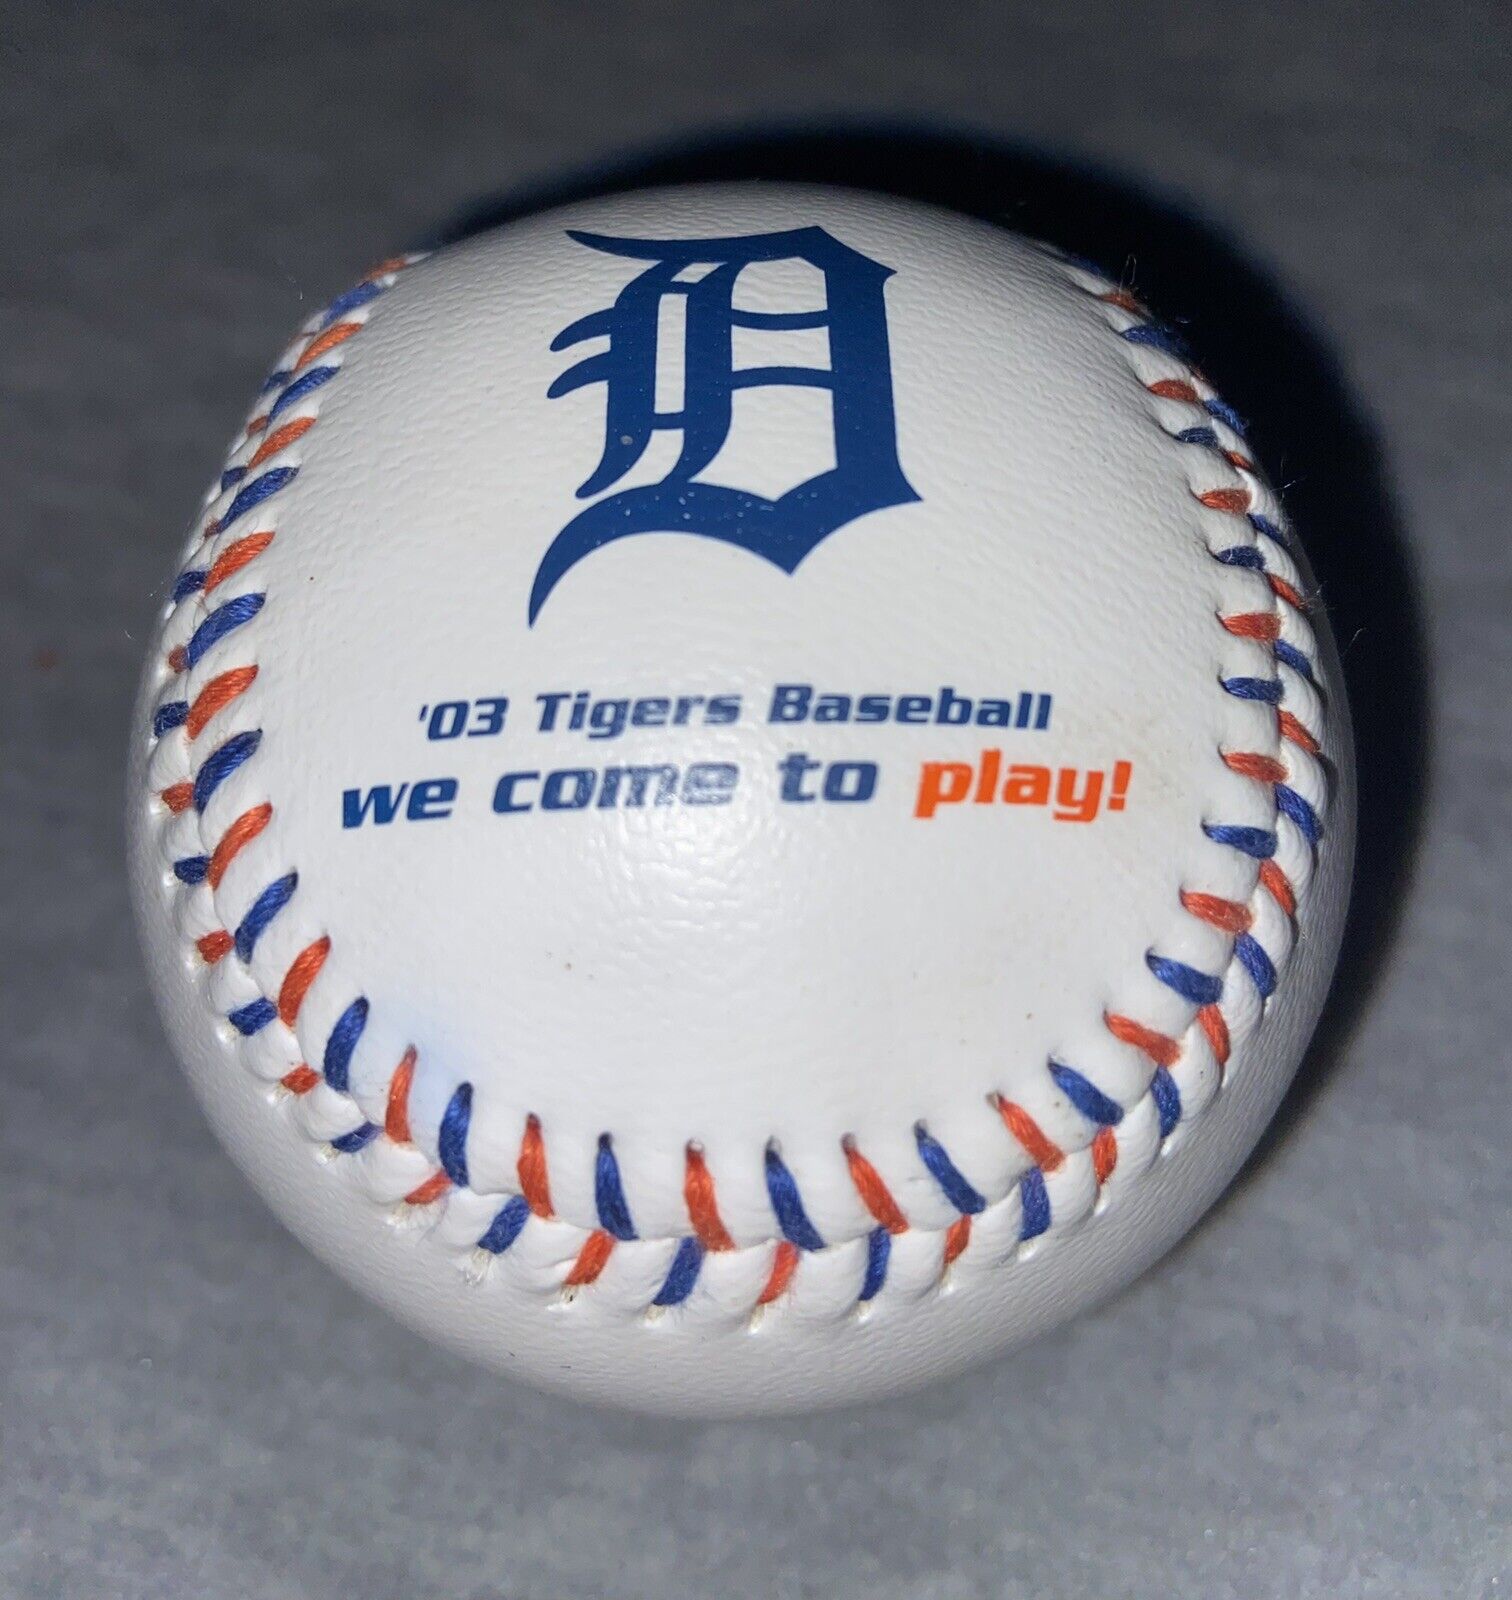 2003 Tigers We Come To Play Commemorative Ball Kroger Blue And Orange Laces